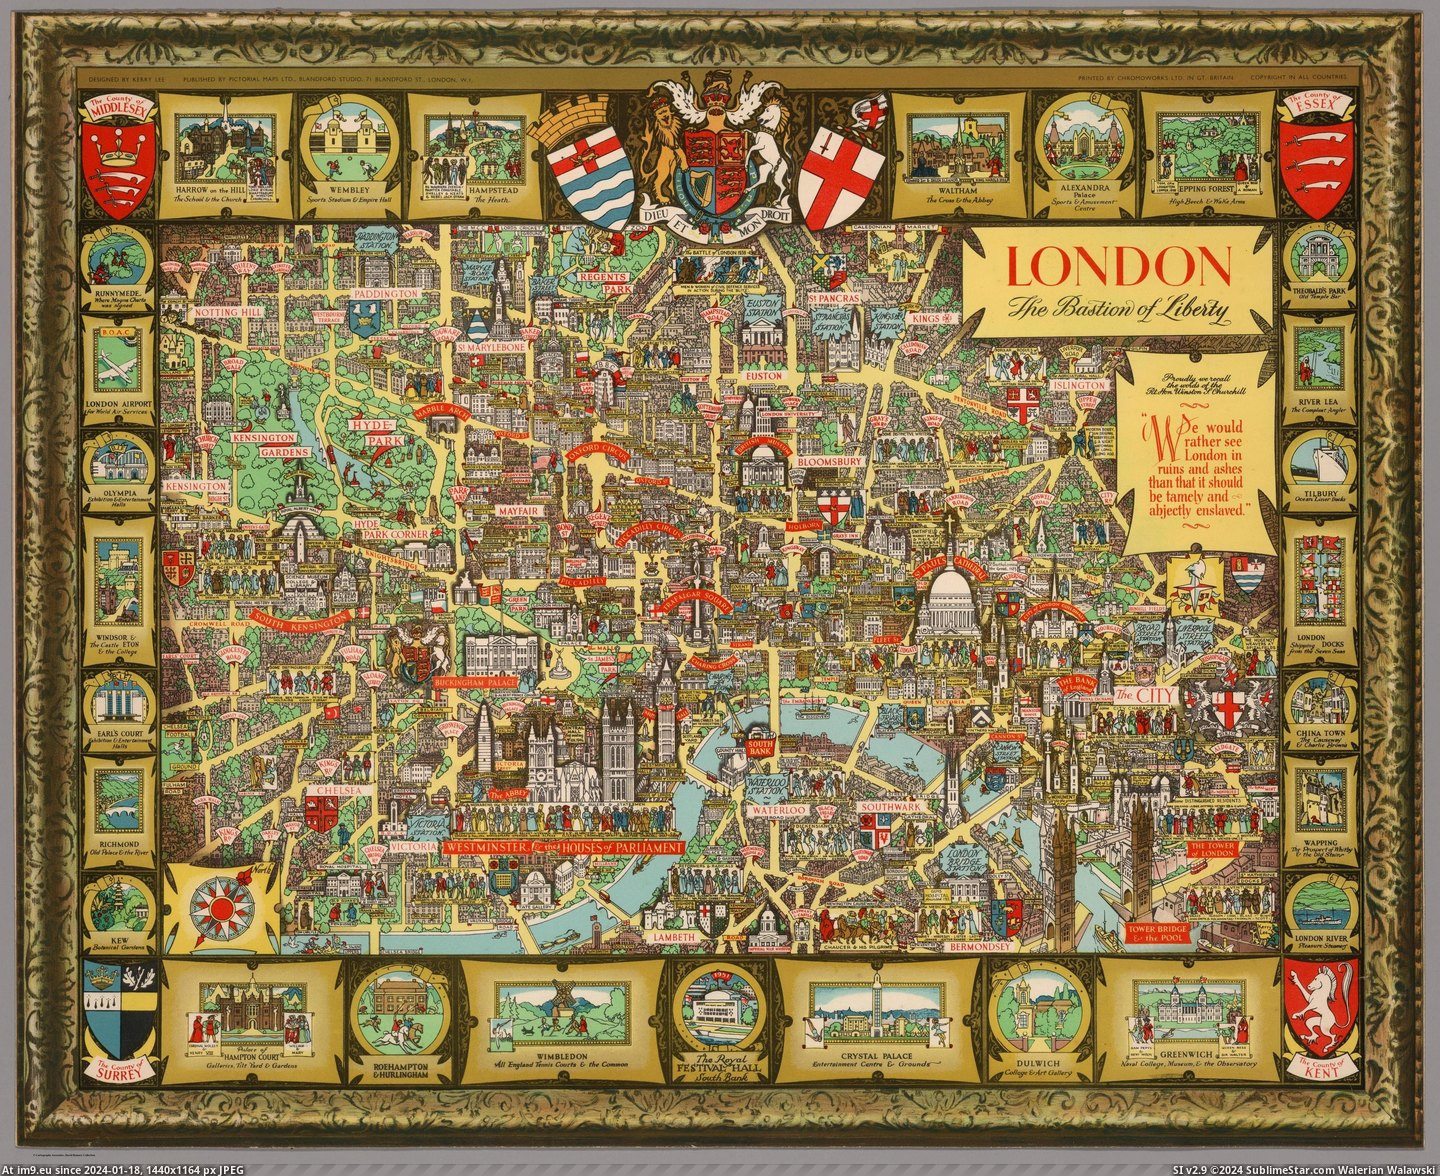 #London #Lee #Bastion #Kerry #Liberty [Mapporn] London the Bastion of Liberty, made by Kerry Lee (1947)[3686x2991] (London) Pic. (Image of album My r/MAPS favs))